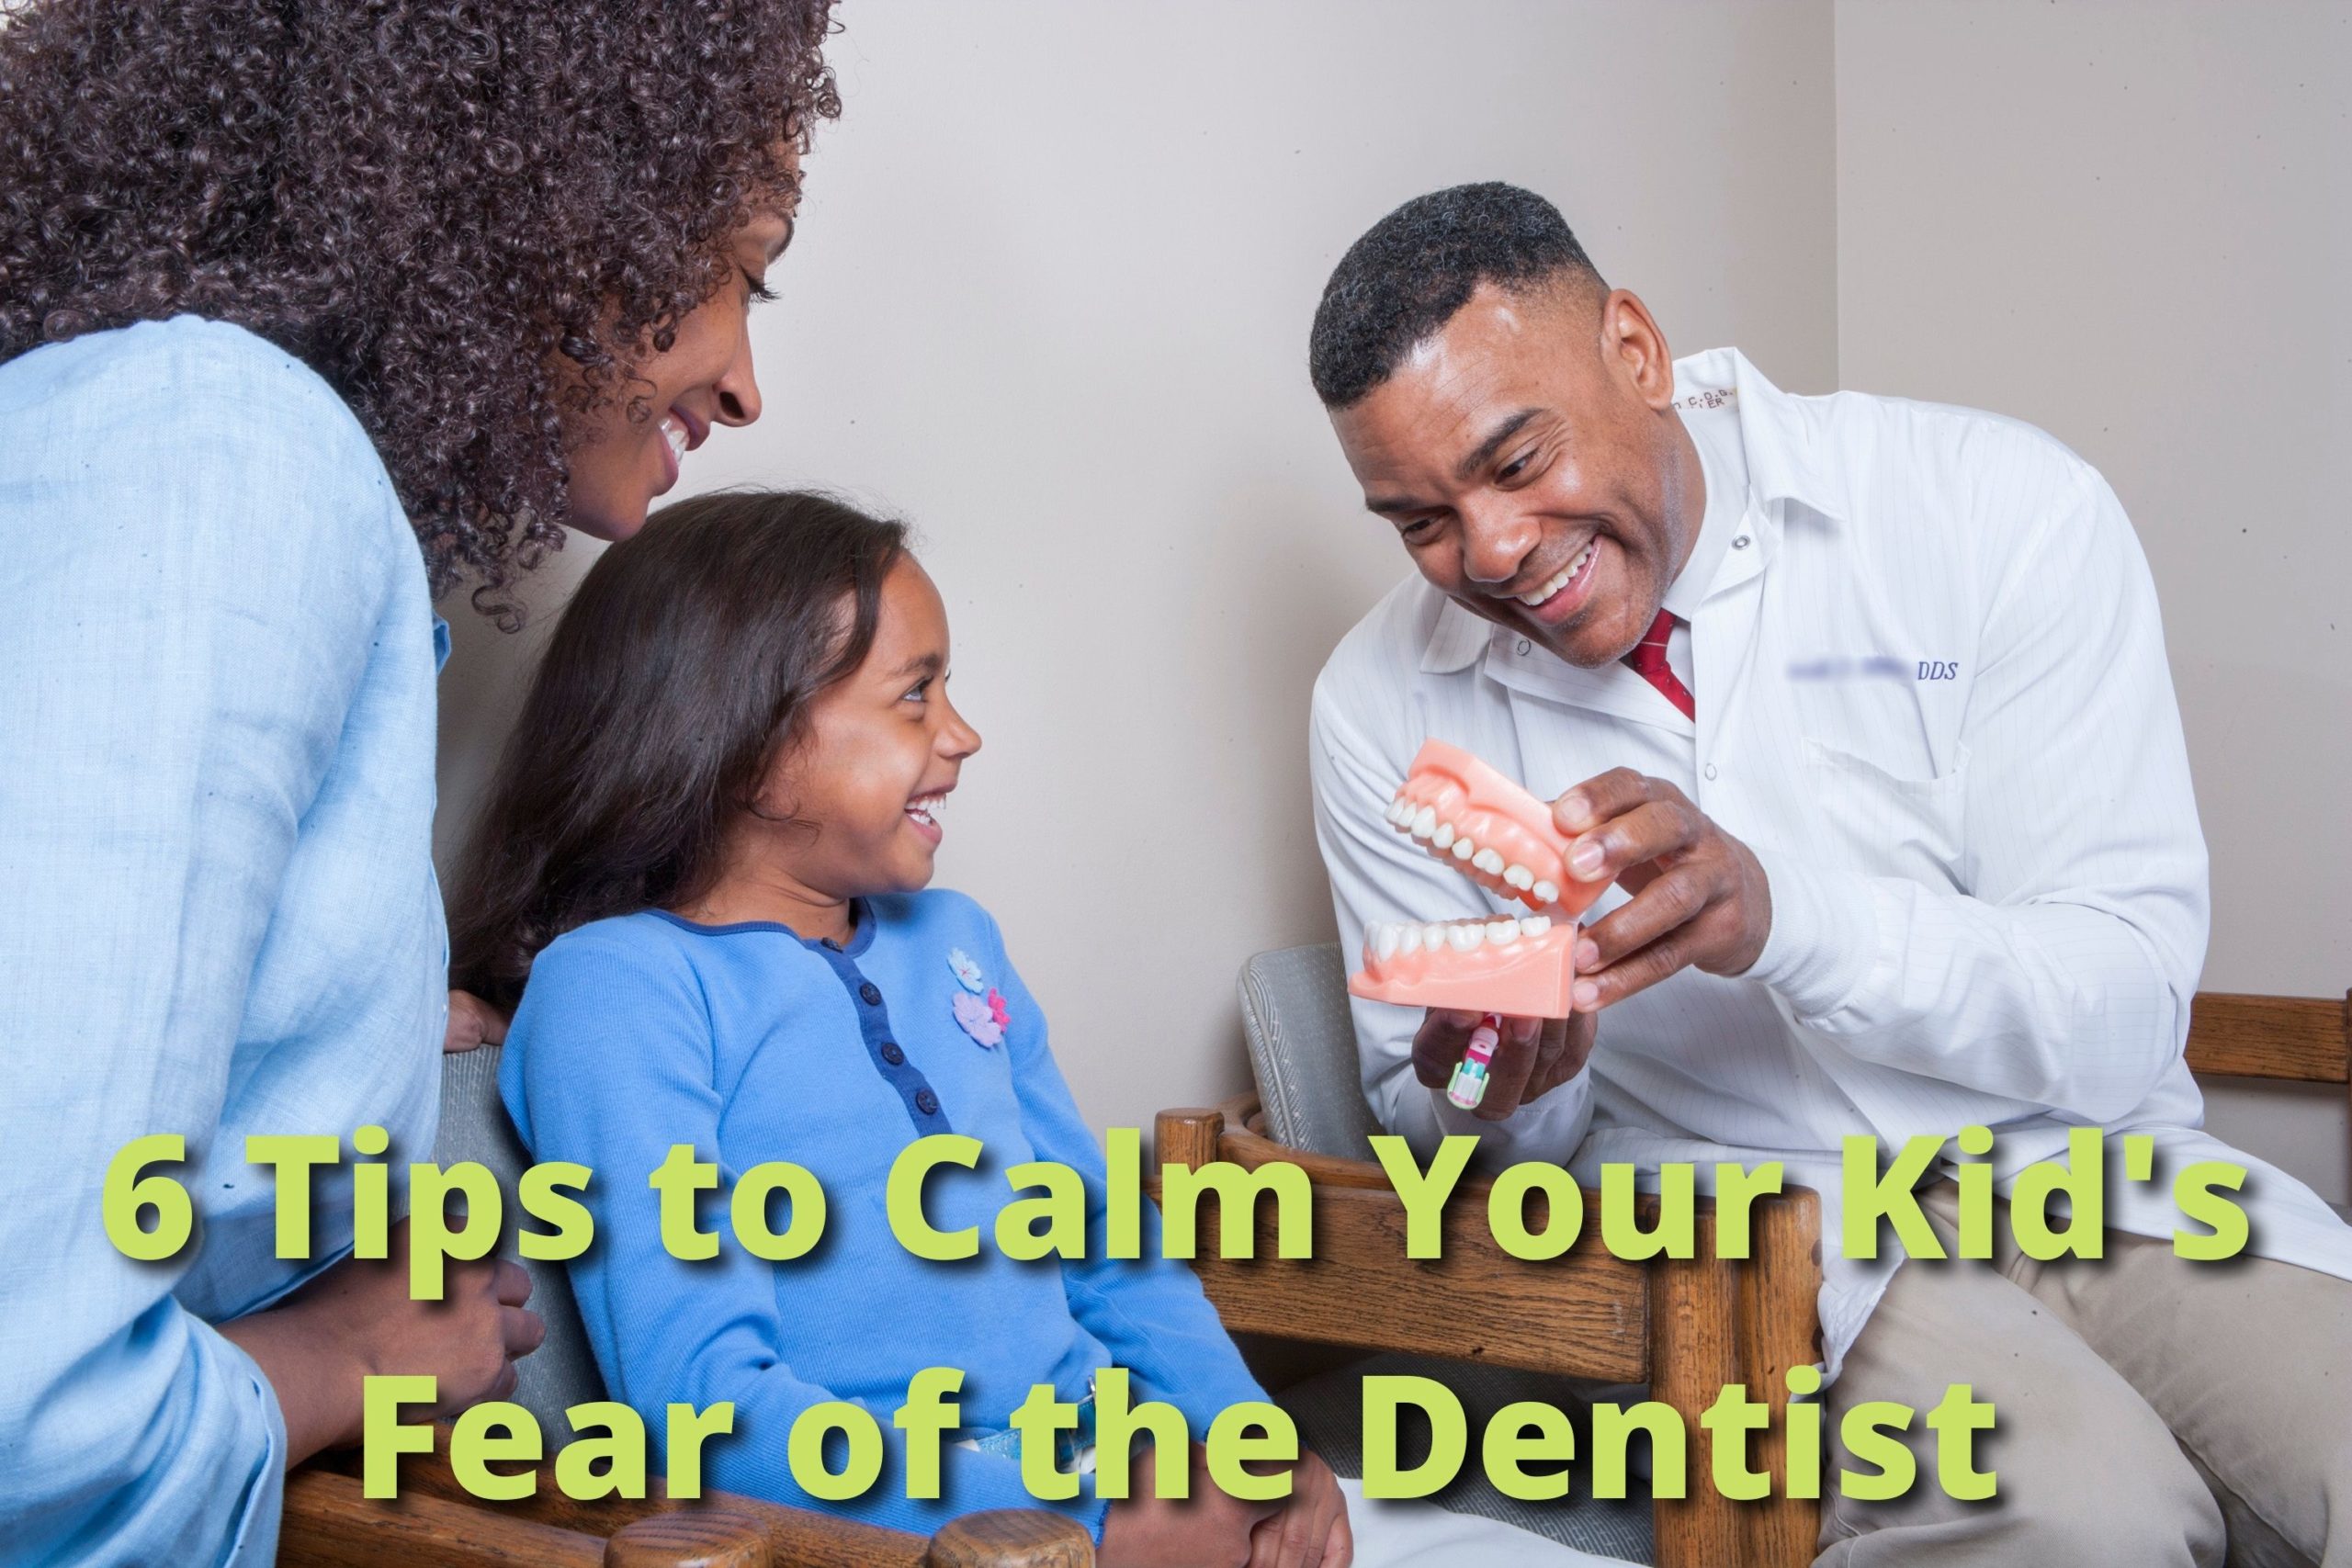 6 Tips to Calm Your Kid's Fear of the Dentist